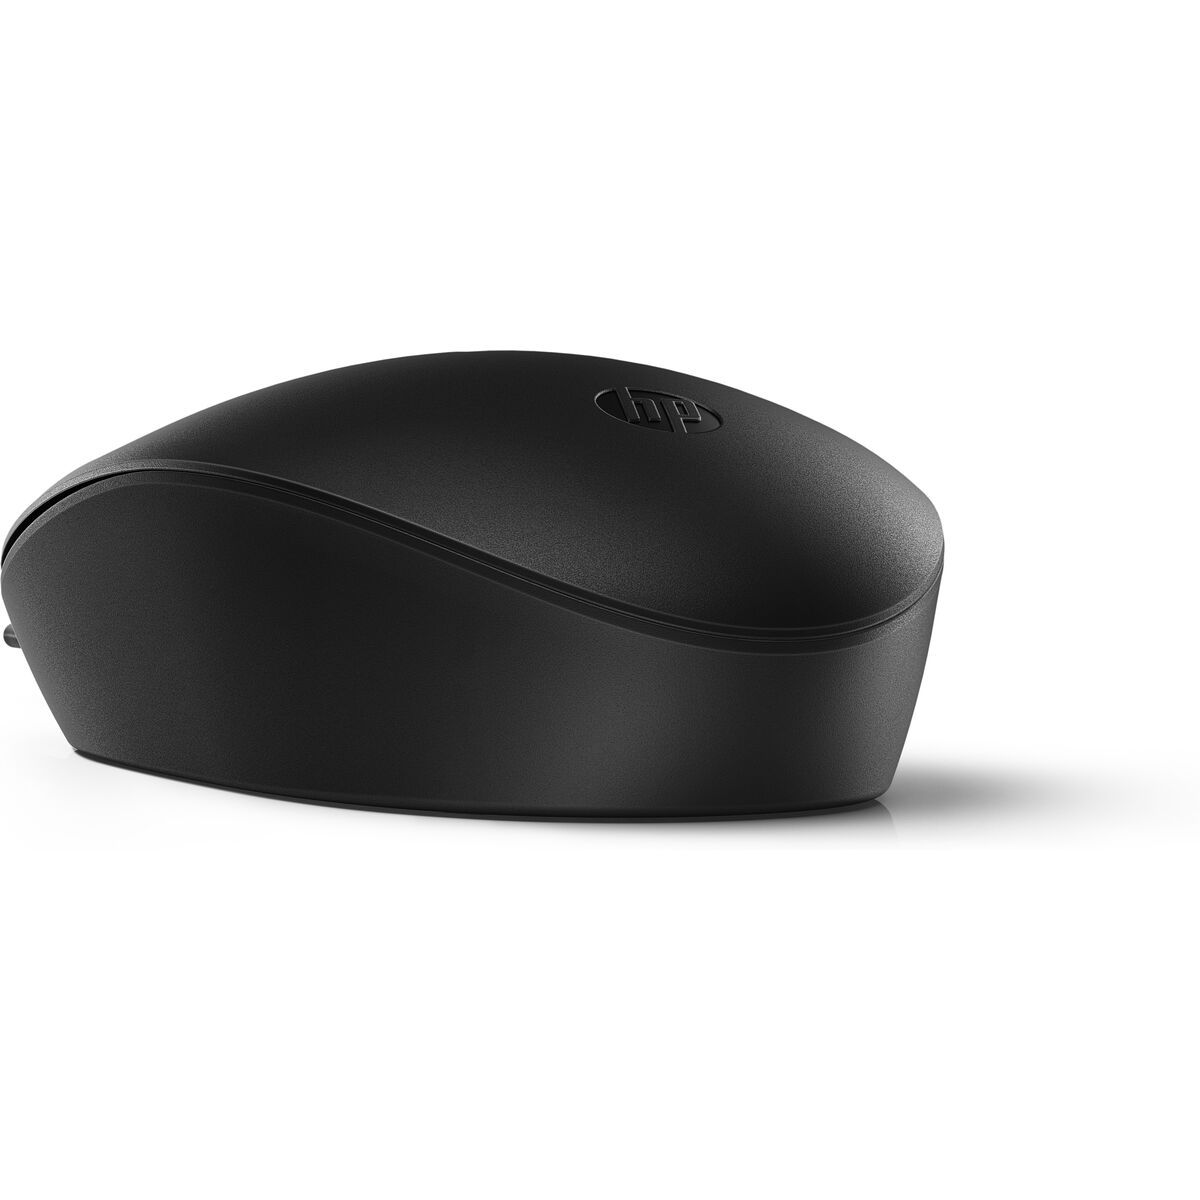 Mouse HP Black, HP, Computing, Accessories, mouse-hp-black-2, Brand_HP, category-reference-2609, category-reference-2642, category-reference-2656, category-reference-t-19685, category-reference-t-19908, category-reference-t-21353, computers / peripherals, Condition_NEW, office, Price_20 - 50, Teleworking, RiotNook